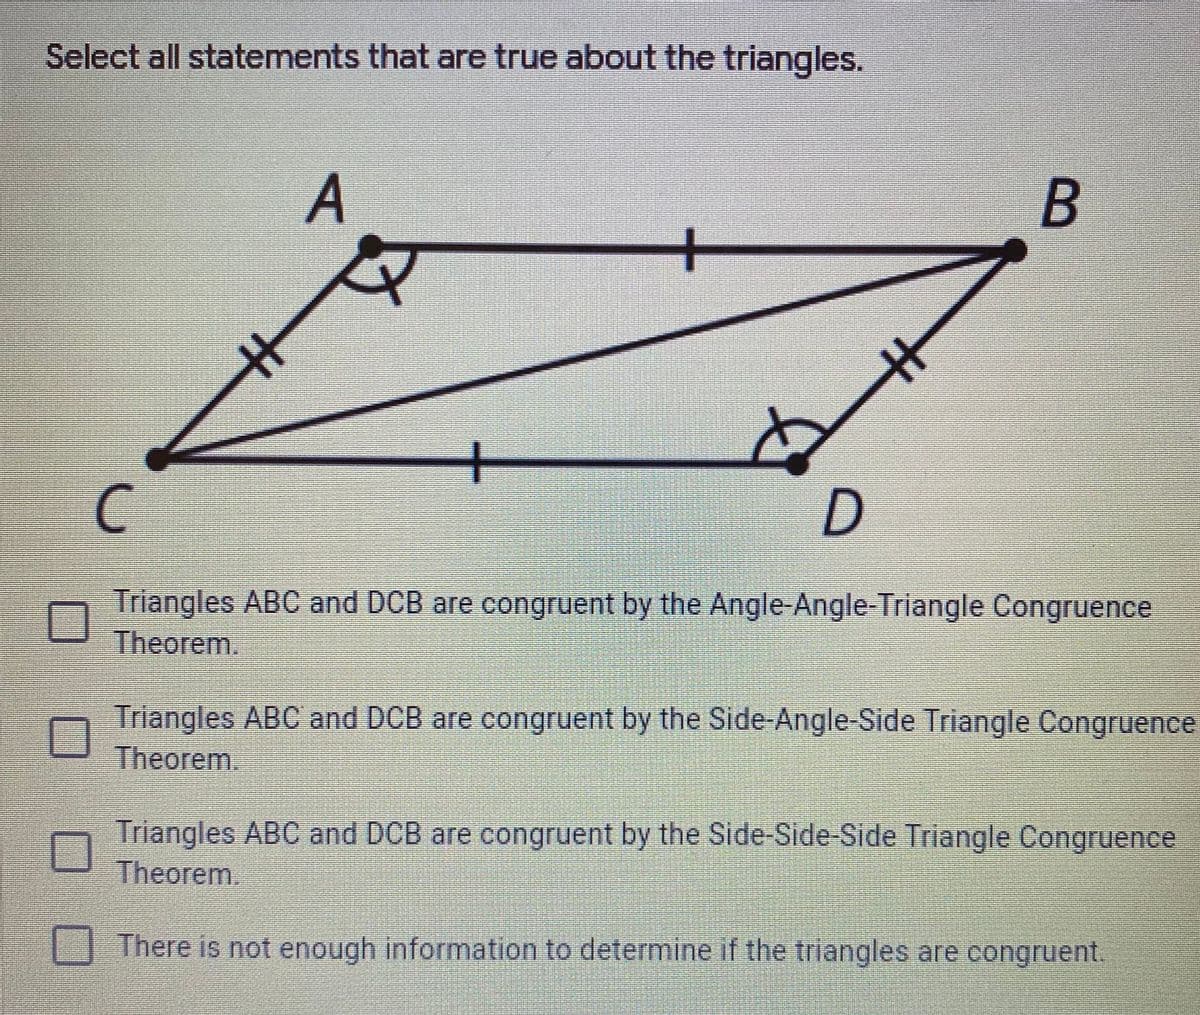 Select all statements that are true about the triangles.
A.
B
メ
+
Triangles ABC and DCB are congruent by the Angle-Angle-Triangle Congruence
Theorem.
Triangles ABC and DCB are congruent by the Side-Angle-Side Triangle Congruence
Theorem.
Triangles ABC and DCB are congruent by the Side-Side-Side Triangle Congruence
Theorem.
There is not enough information to determine if the triangles are congruent.
